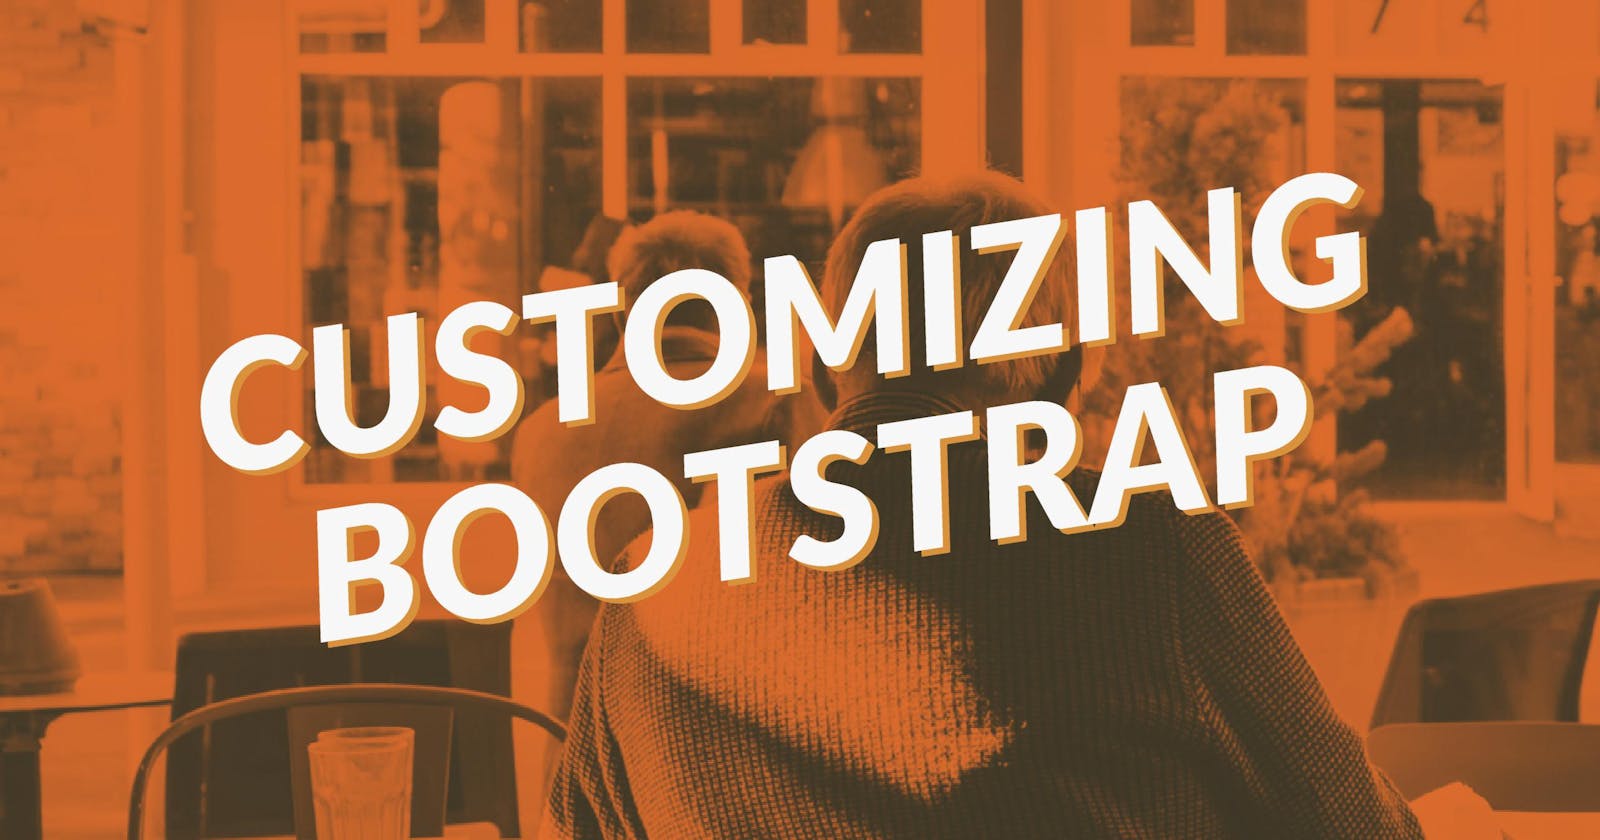 Customizing Bootstrap Styles, Step-by-Step